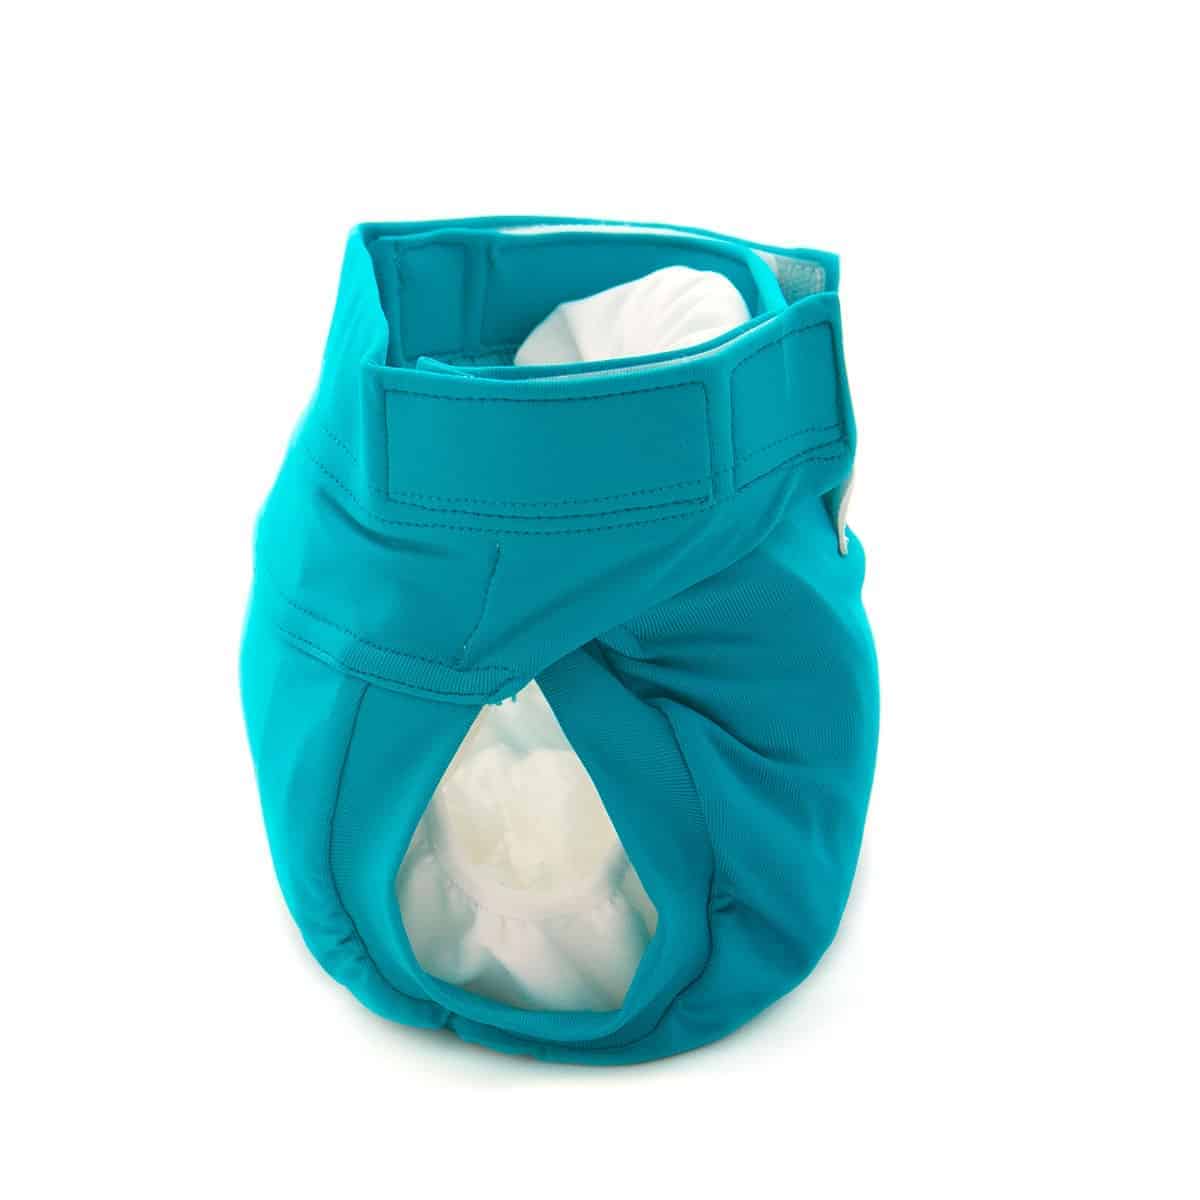 Soft Touch Pants - Ocean - Cloth Nappies